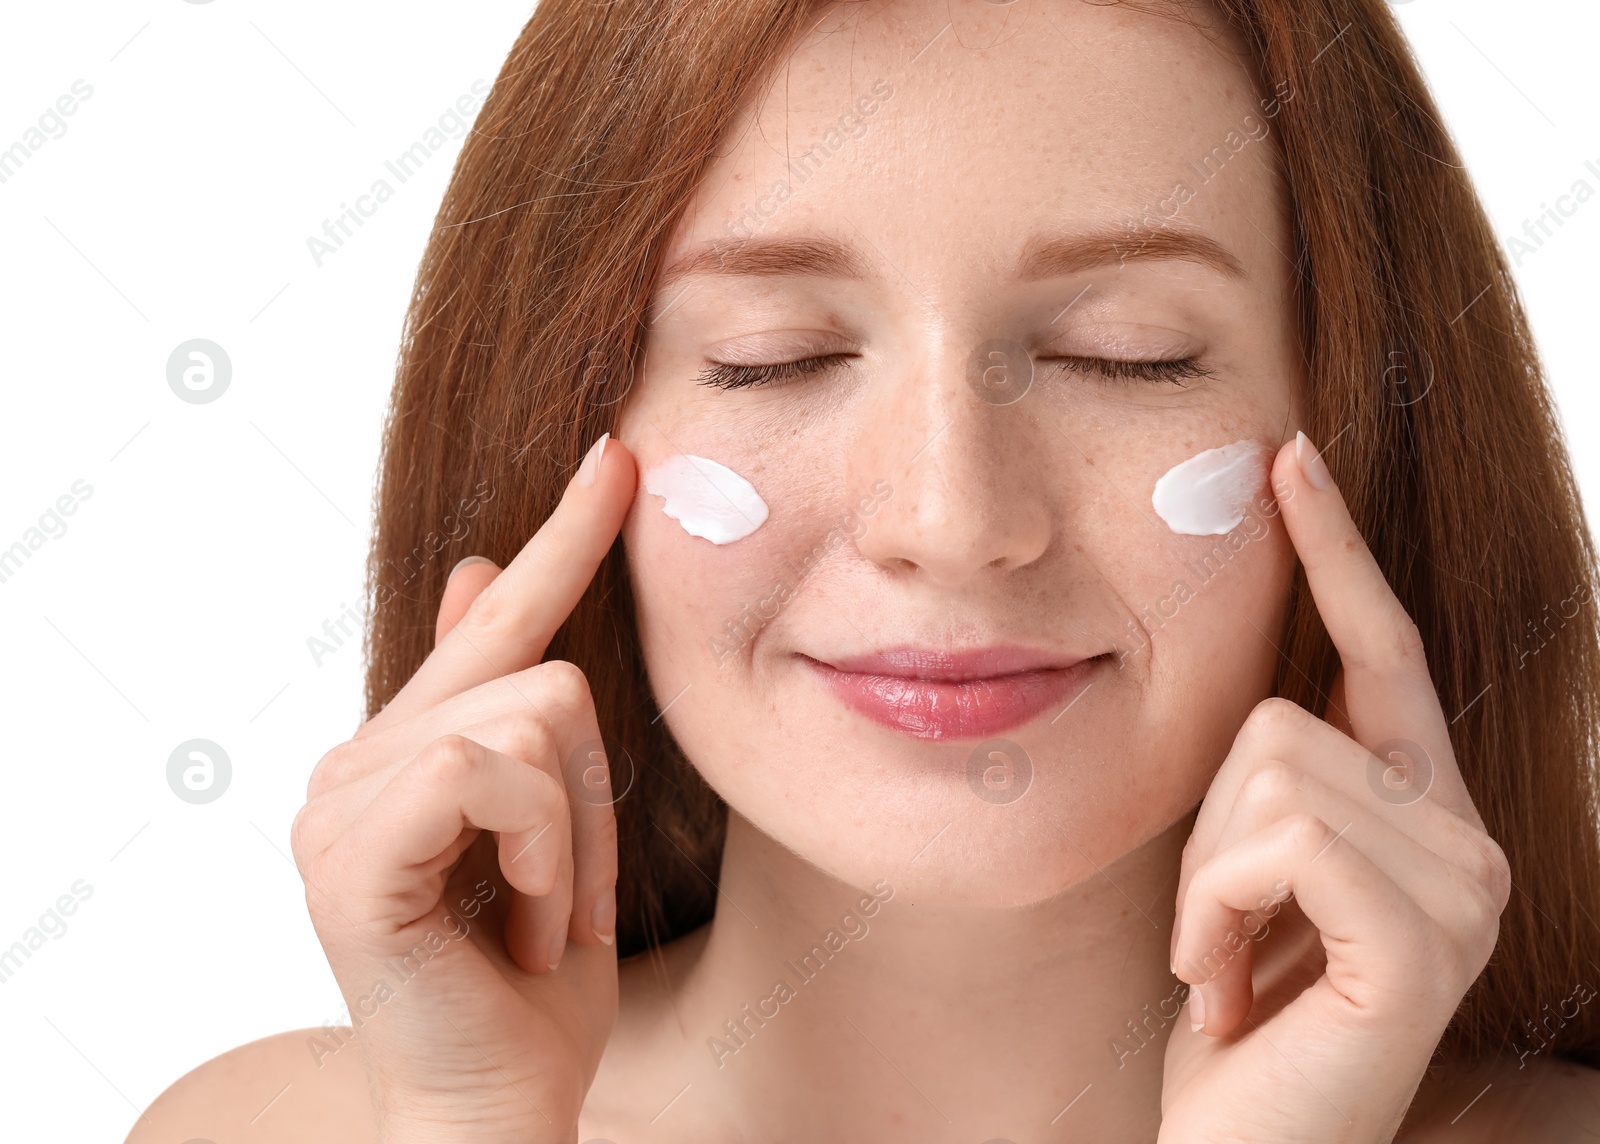 Photo of Beautiful woman with freckles applying cream onto her face against white background